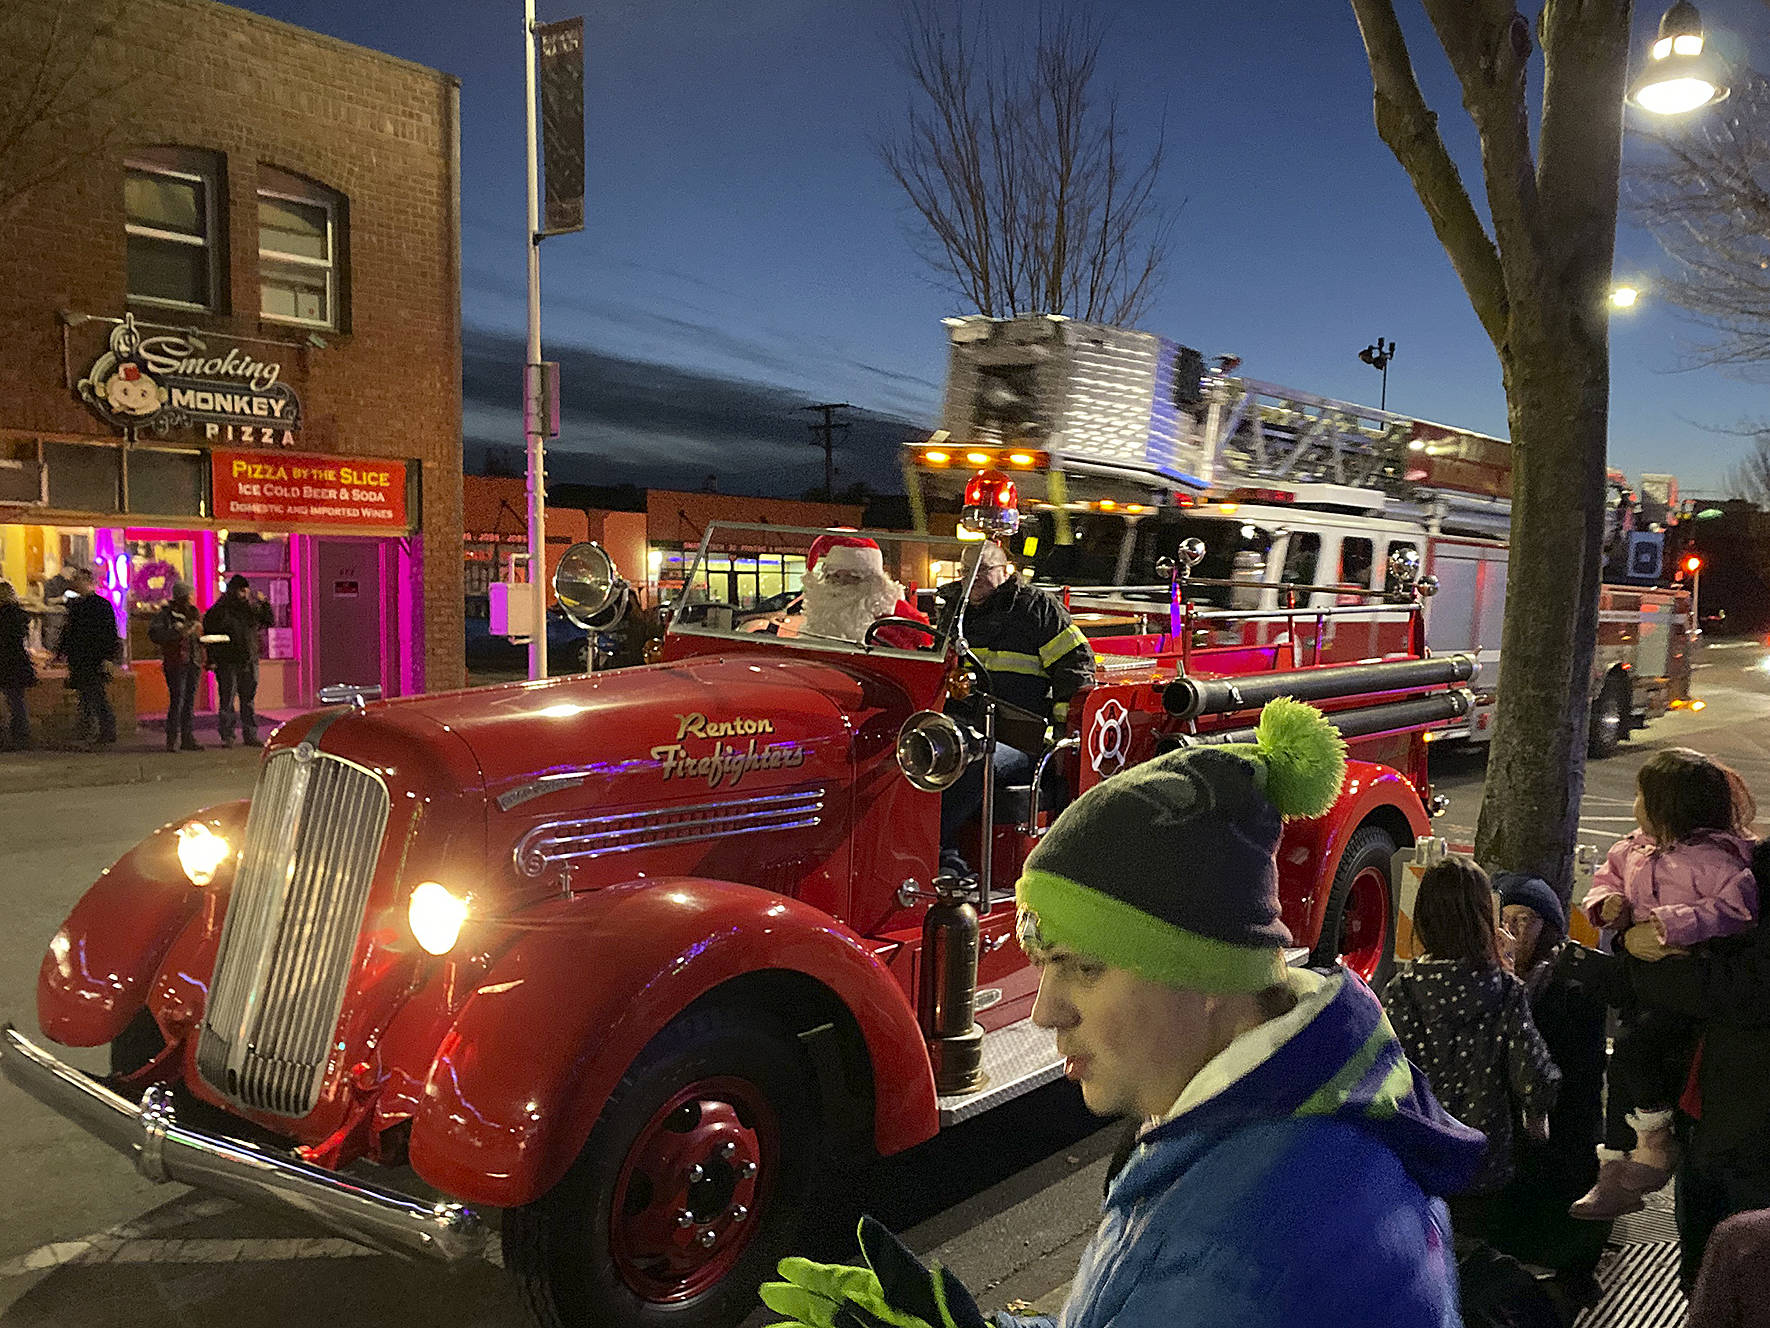 Photo by Haley Ausbun. After the tree lighting, Santa Claus rolled up with his friends at Renton Regional Fire Authority, Saturday, Nov. 30 at Piazza Park.